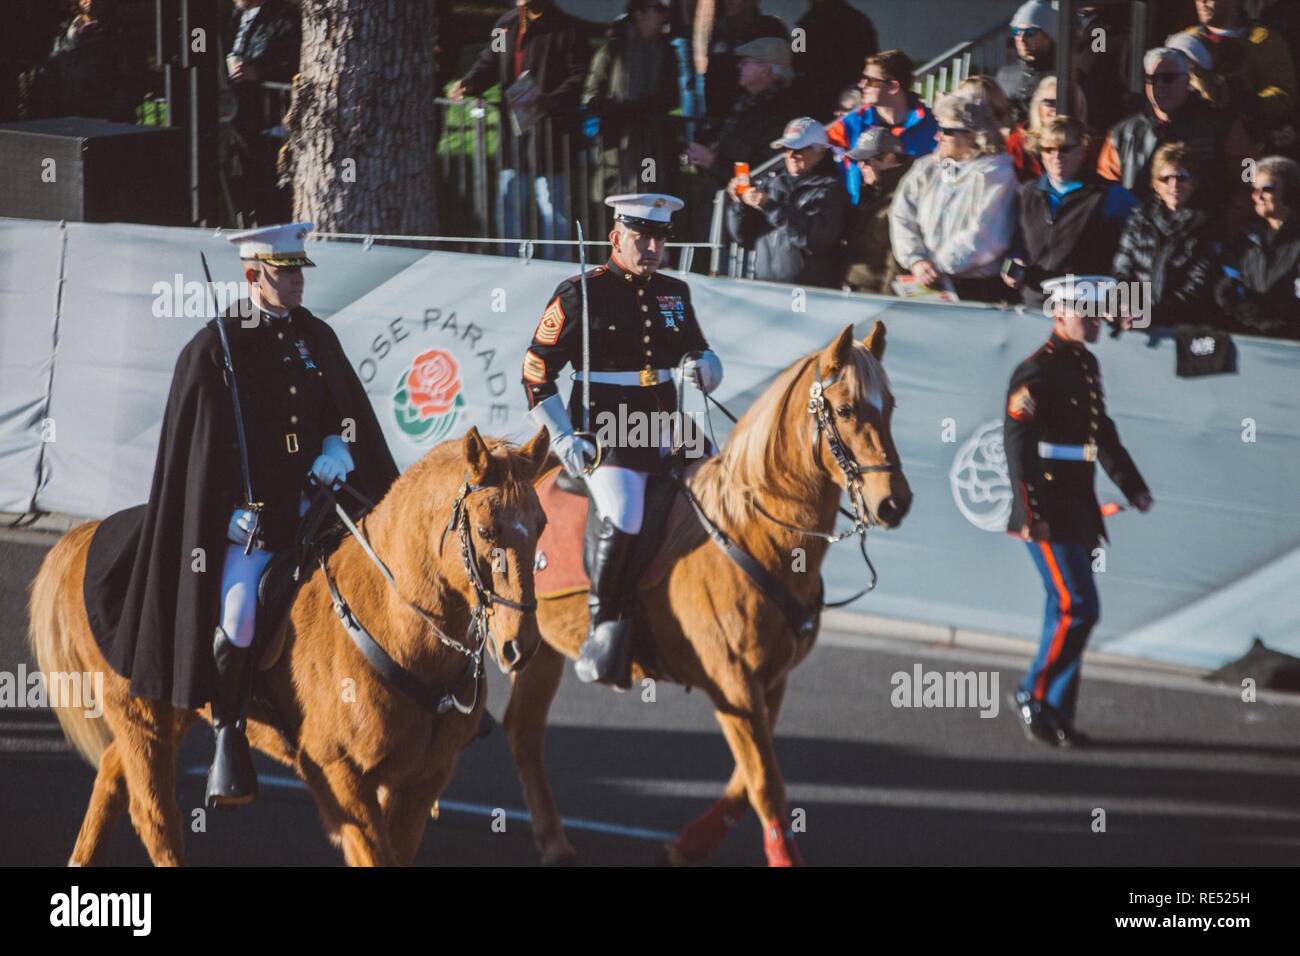 The Marine Corps Mounted Color Guard participates in the 130th annual Rose Bowl Parade with the United States Marine Corps West Coast Composite Band  in Pasadena, CA. on Jan. 1, 2019.  The mounted color guard is the only equestrian color guard in the Marine Corps and is stationed at Marine Corps Logistics Base, Barstow, California. Stock Photo